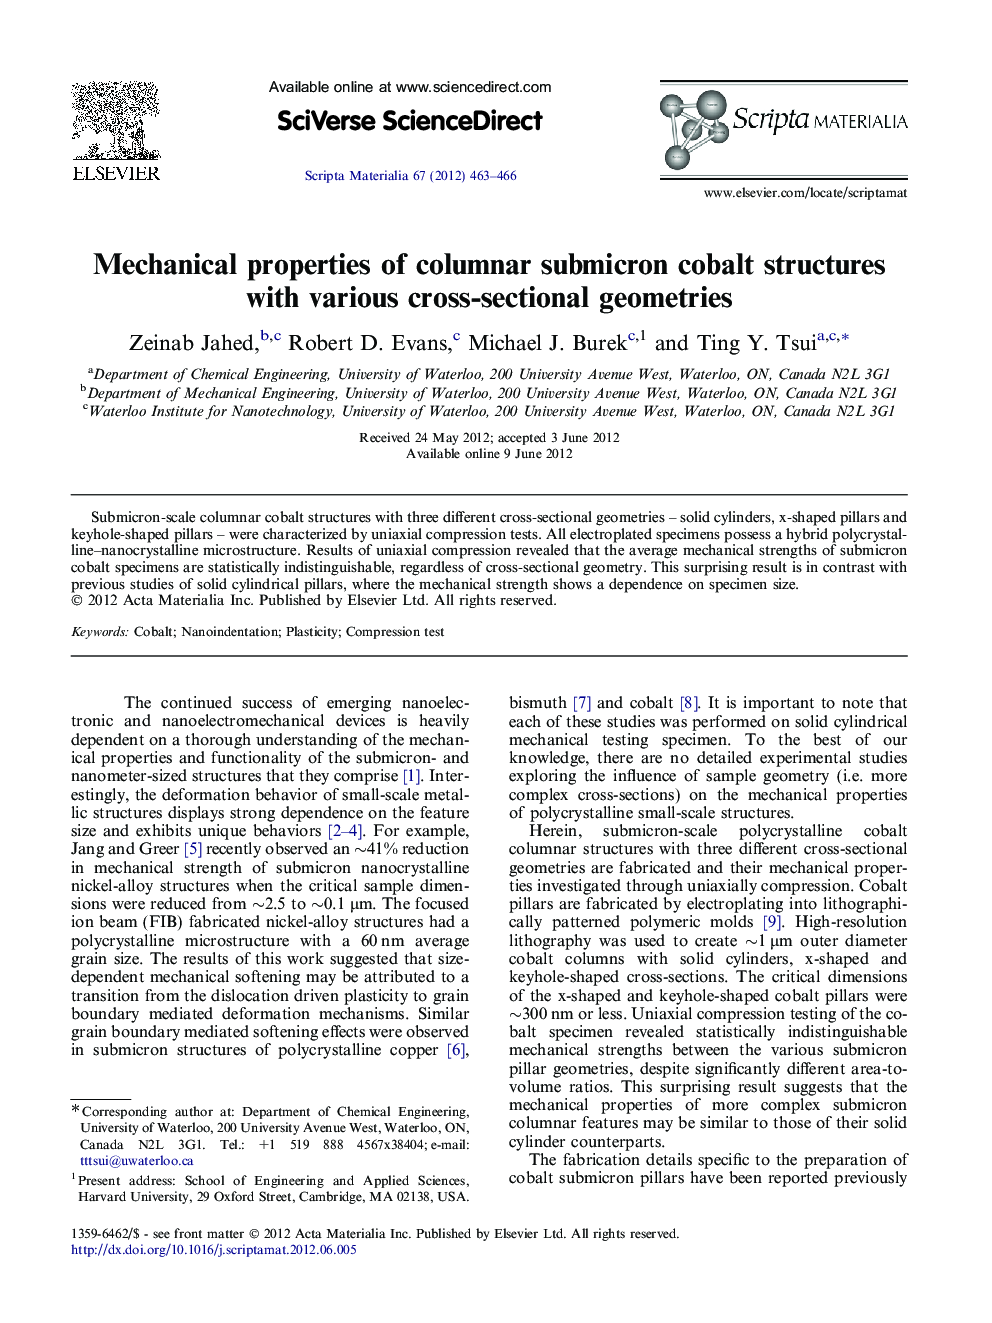 Mechanical properties of columnar submicron cobalt structures with various cross-sectional geometries